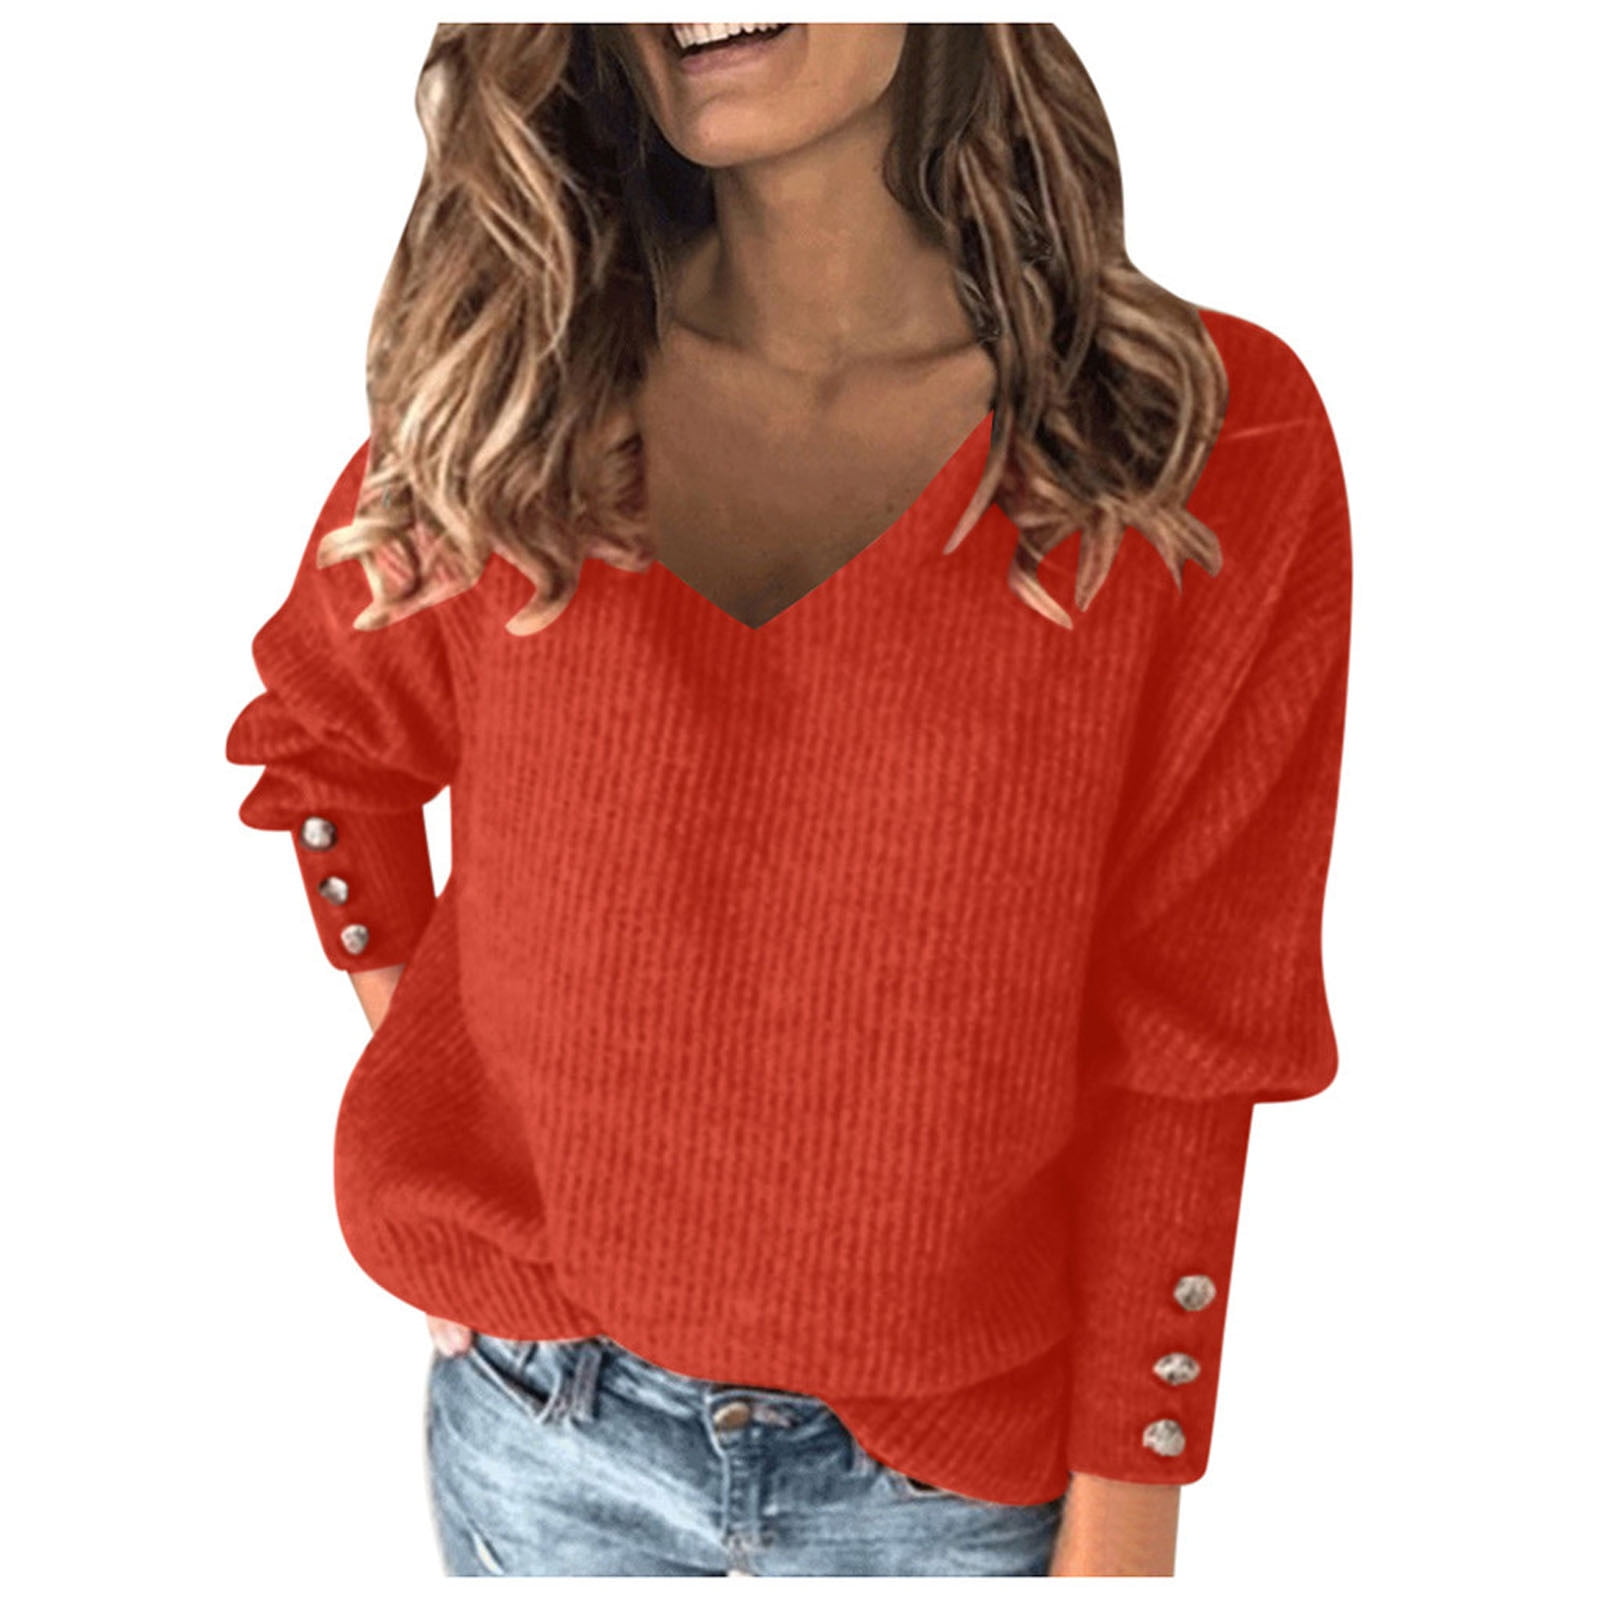 Ladies  Long Sleeve V Neck Knitted Casual Sweatshirt Blouse T-Shirt Jumper Tops 